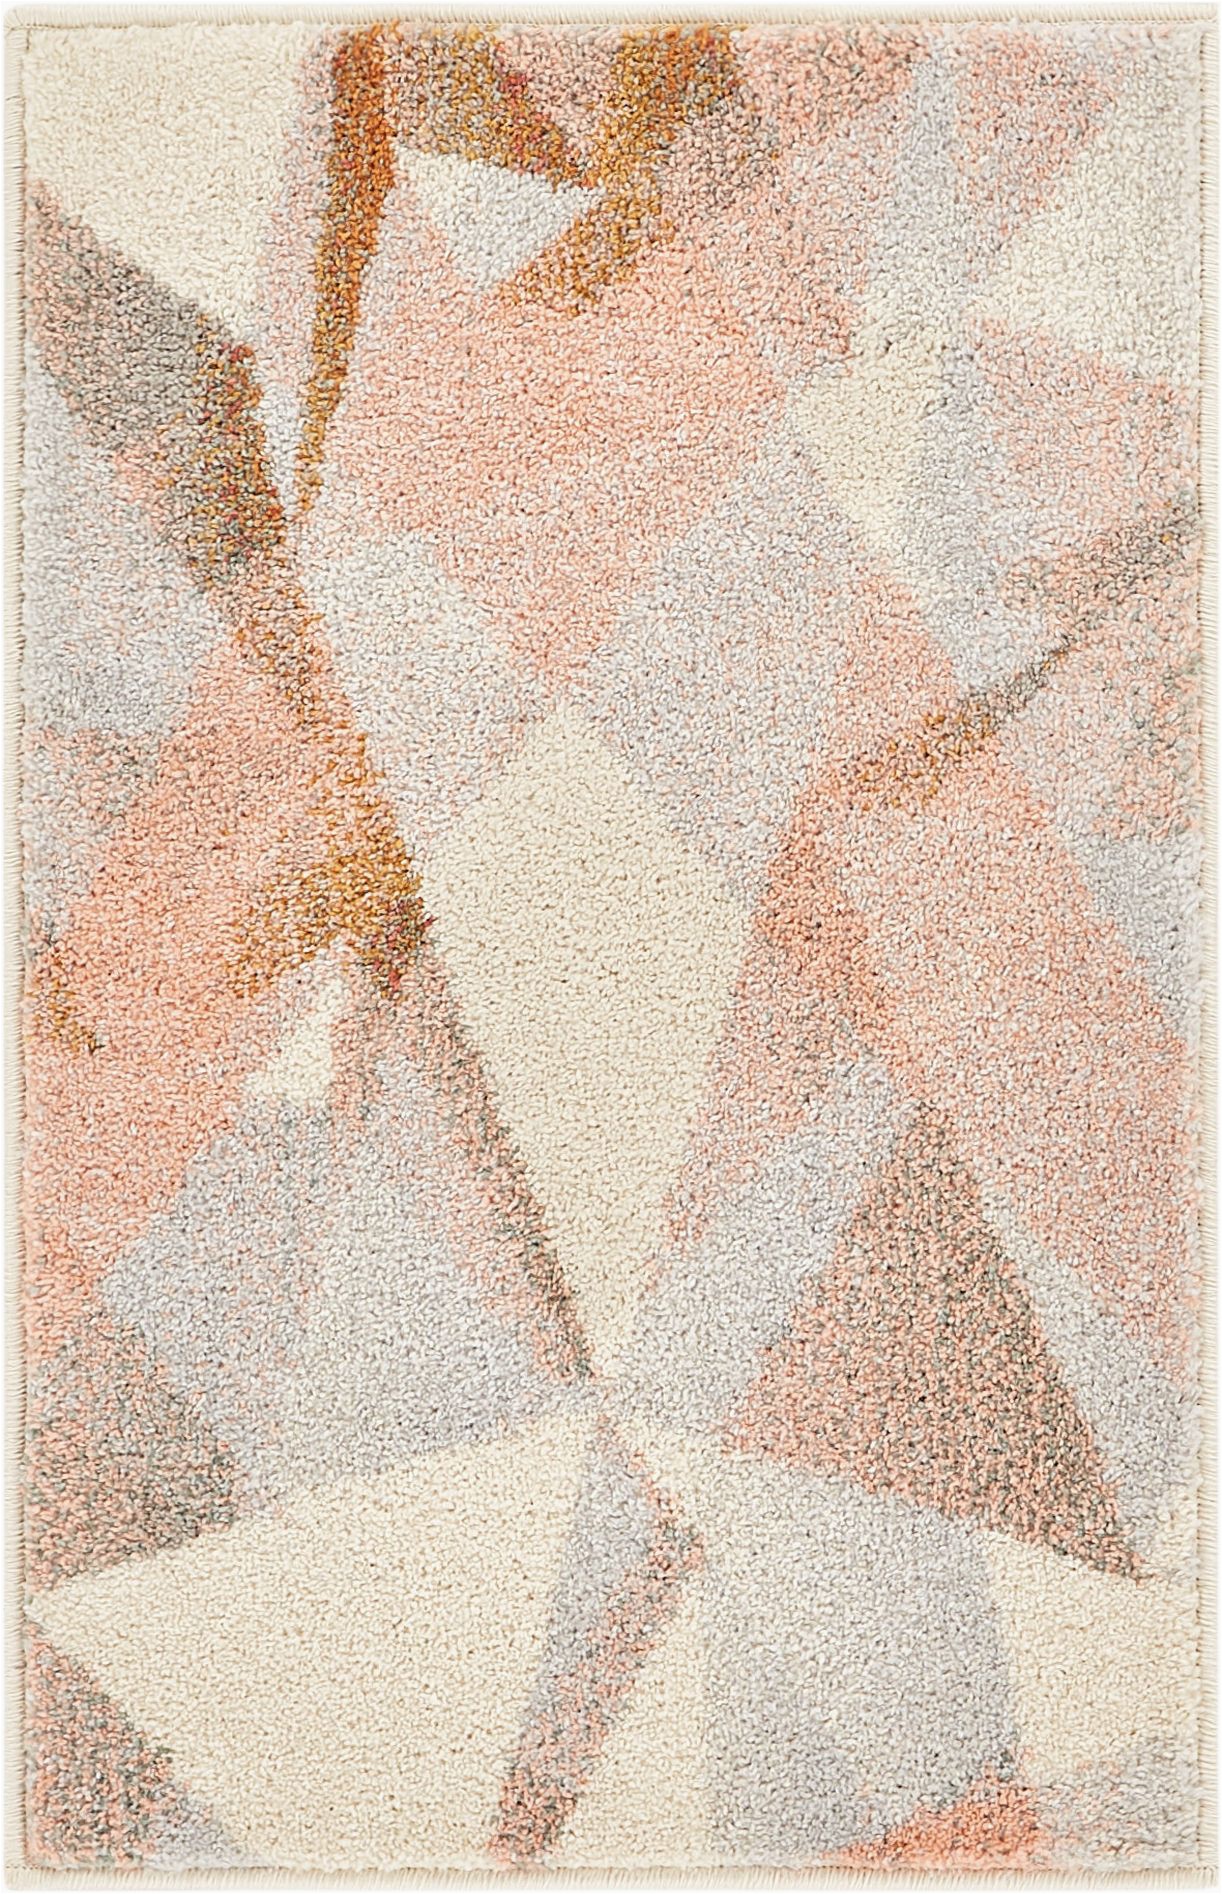 Blush and Gold area Rug Well Woven Barra Blush Pink Multi Modern Geometric Triangle Pattern Abstract area Rug 20×31 20" X 31" Mat Contemporary Thick soft Plush